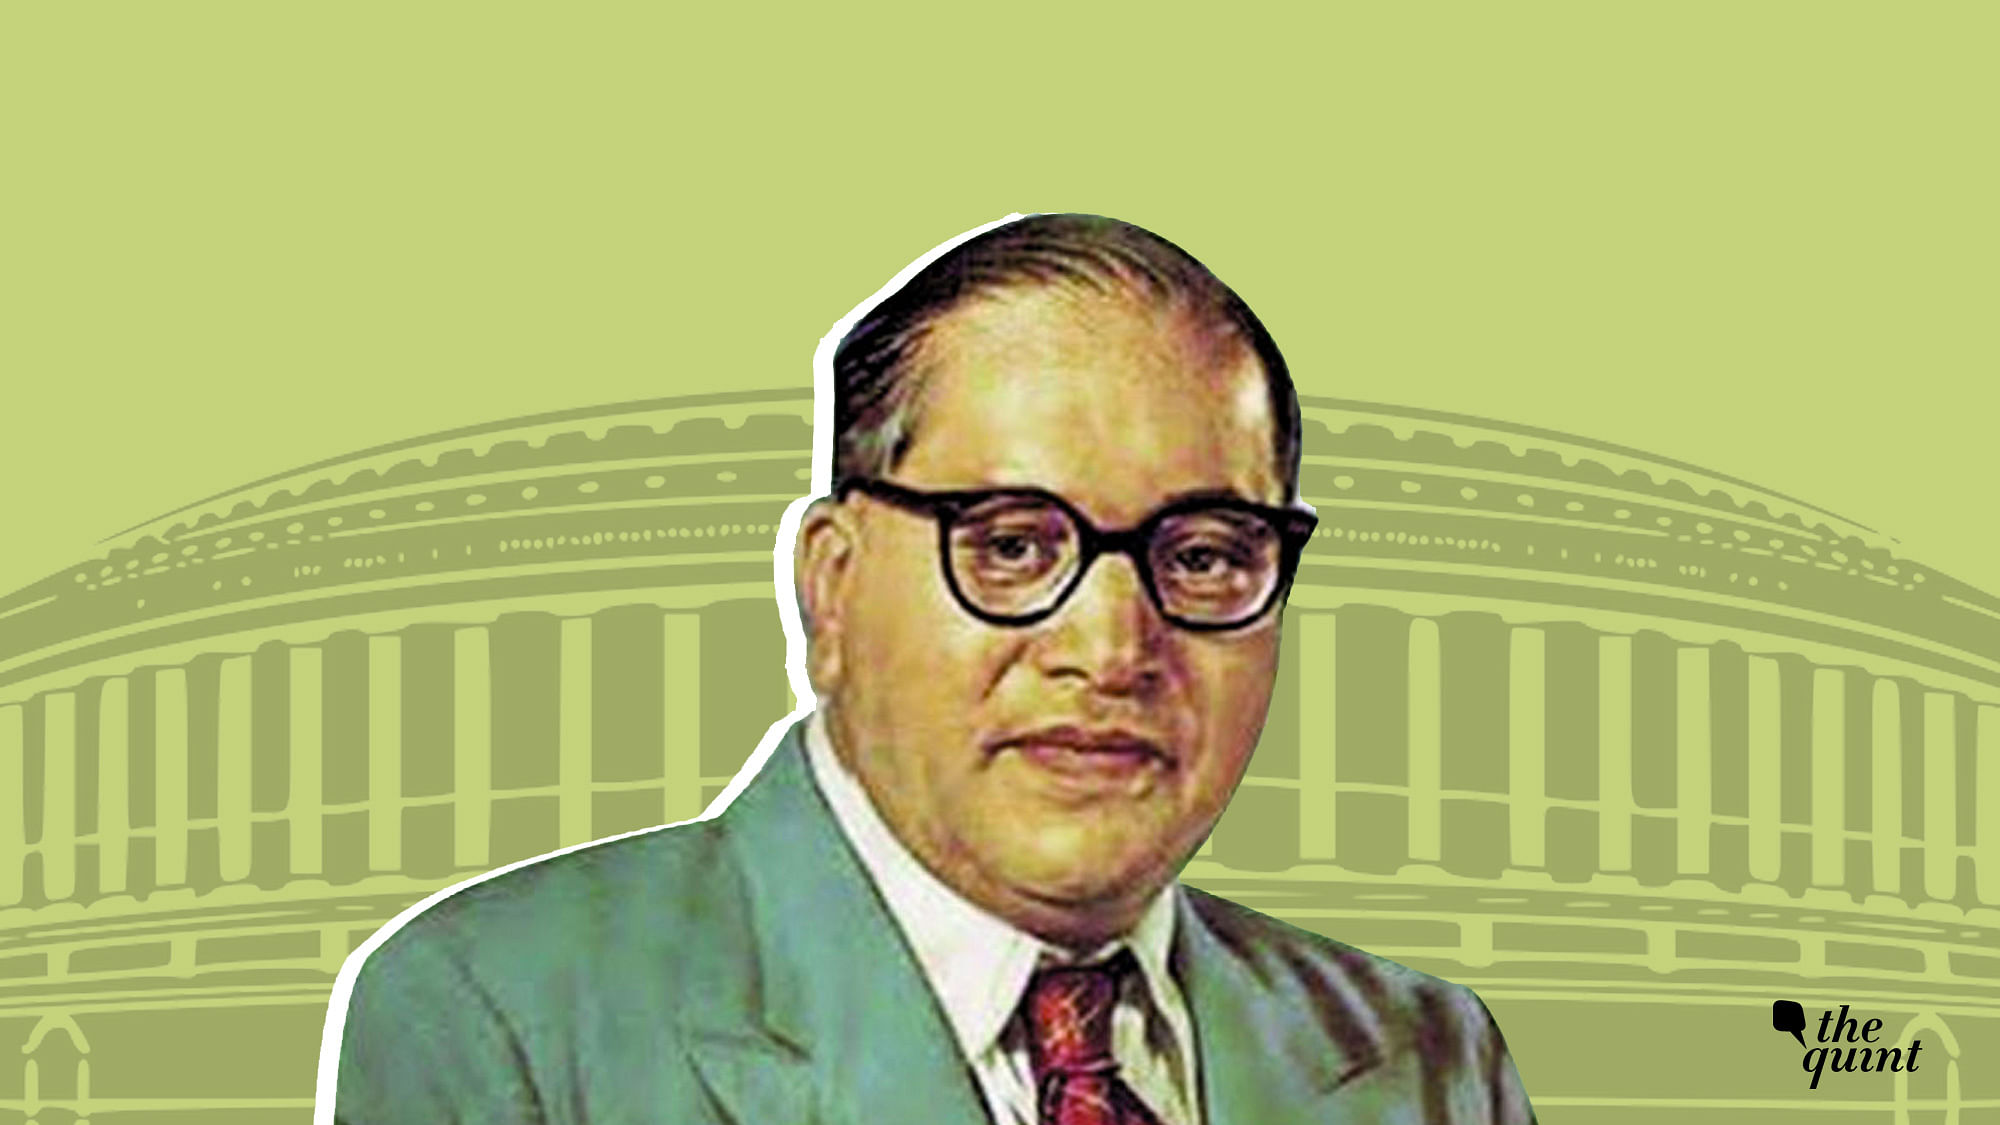 Ambedkar had stood as a candidate from the Central Bombay constituency in the 1937 election with a very unusual symbol for the ILP